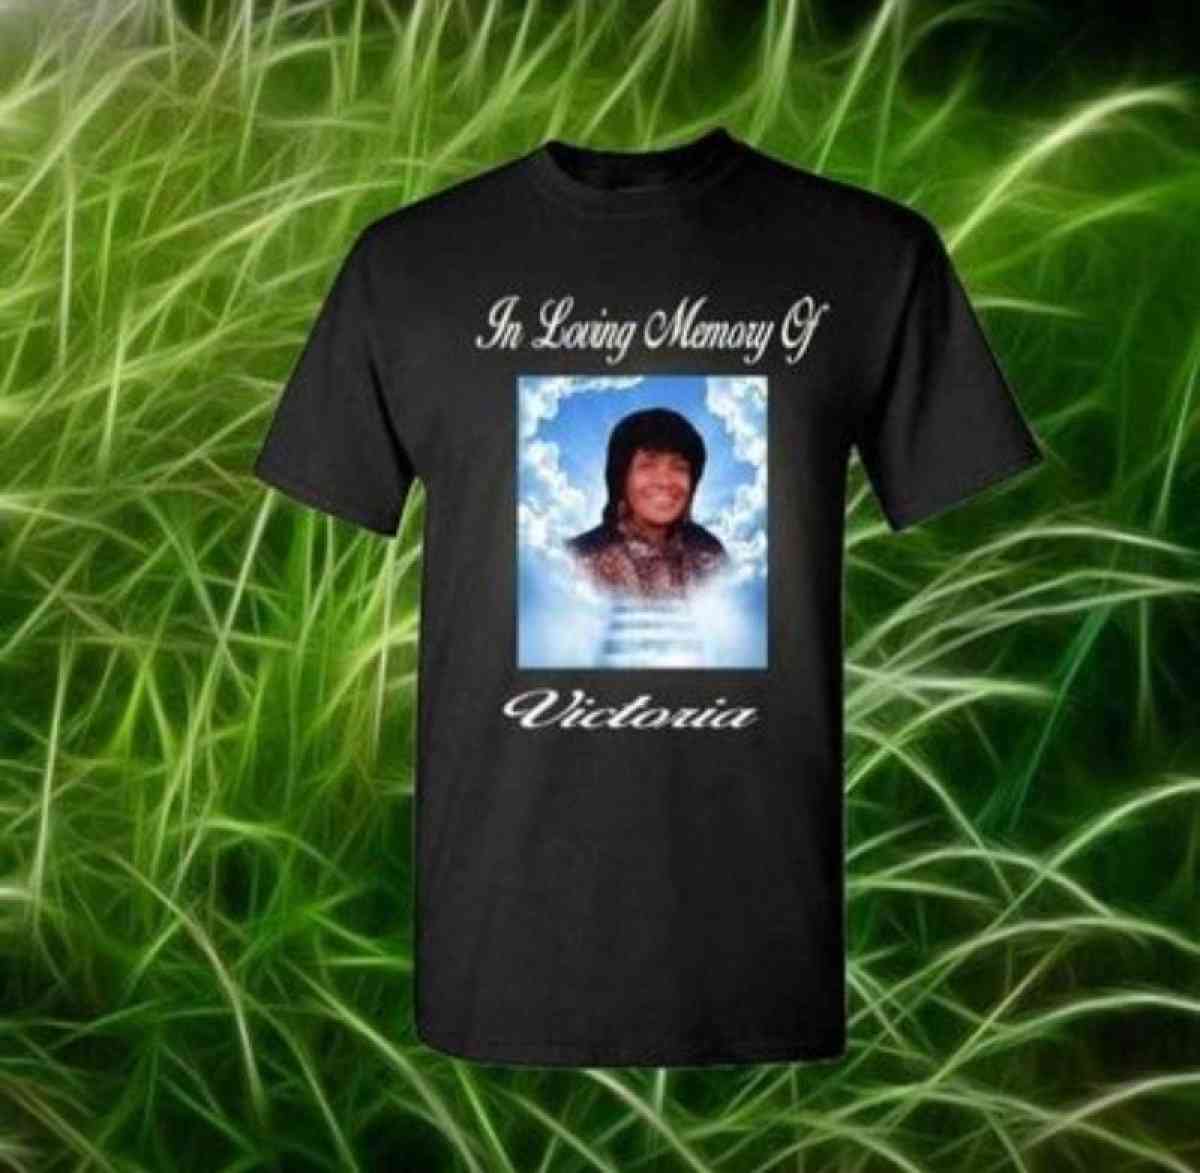 Funeral T shirts and other items